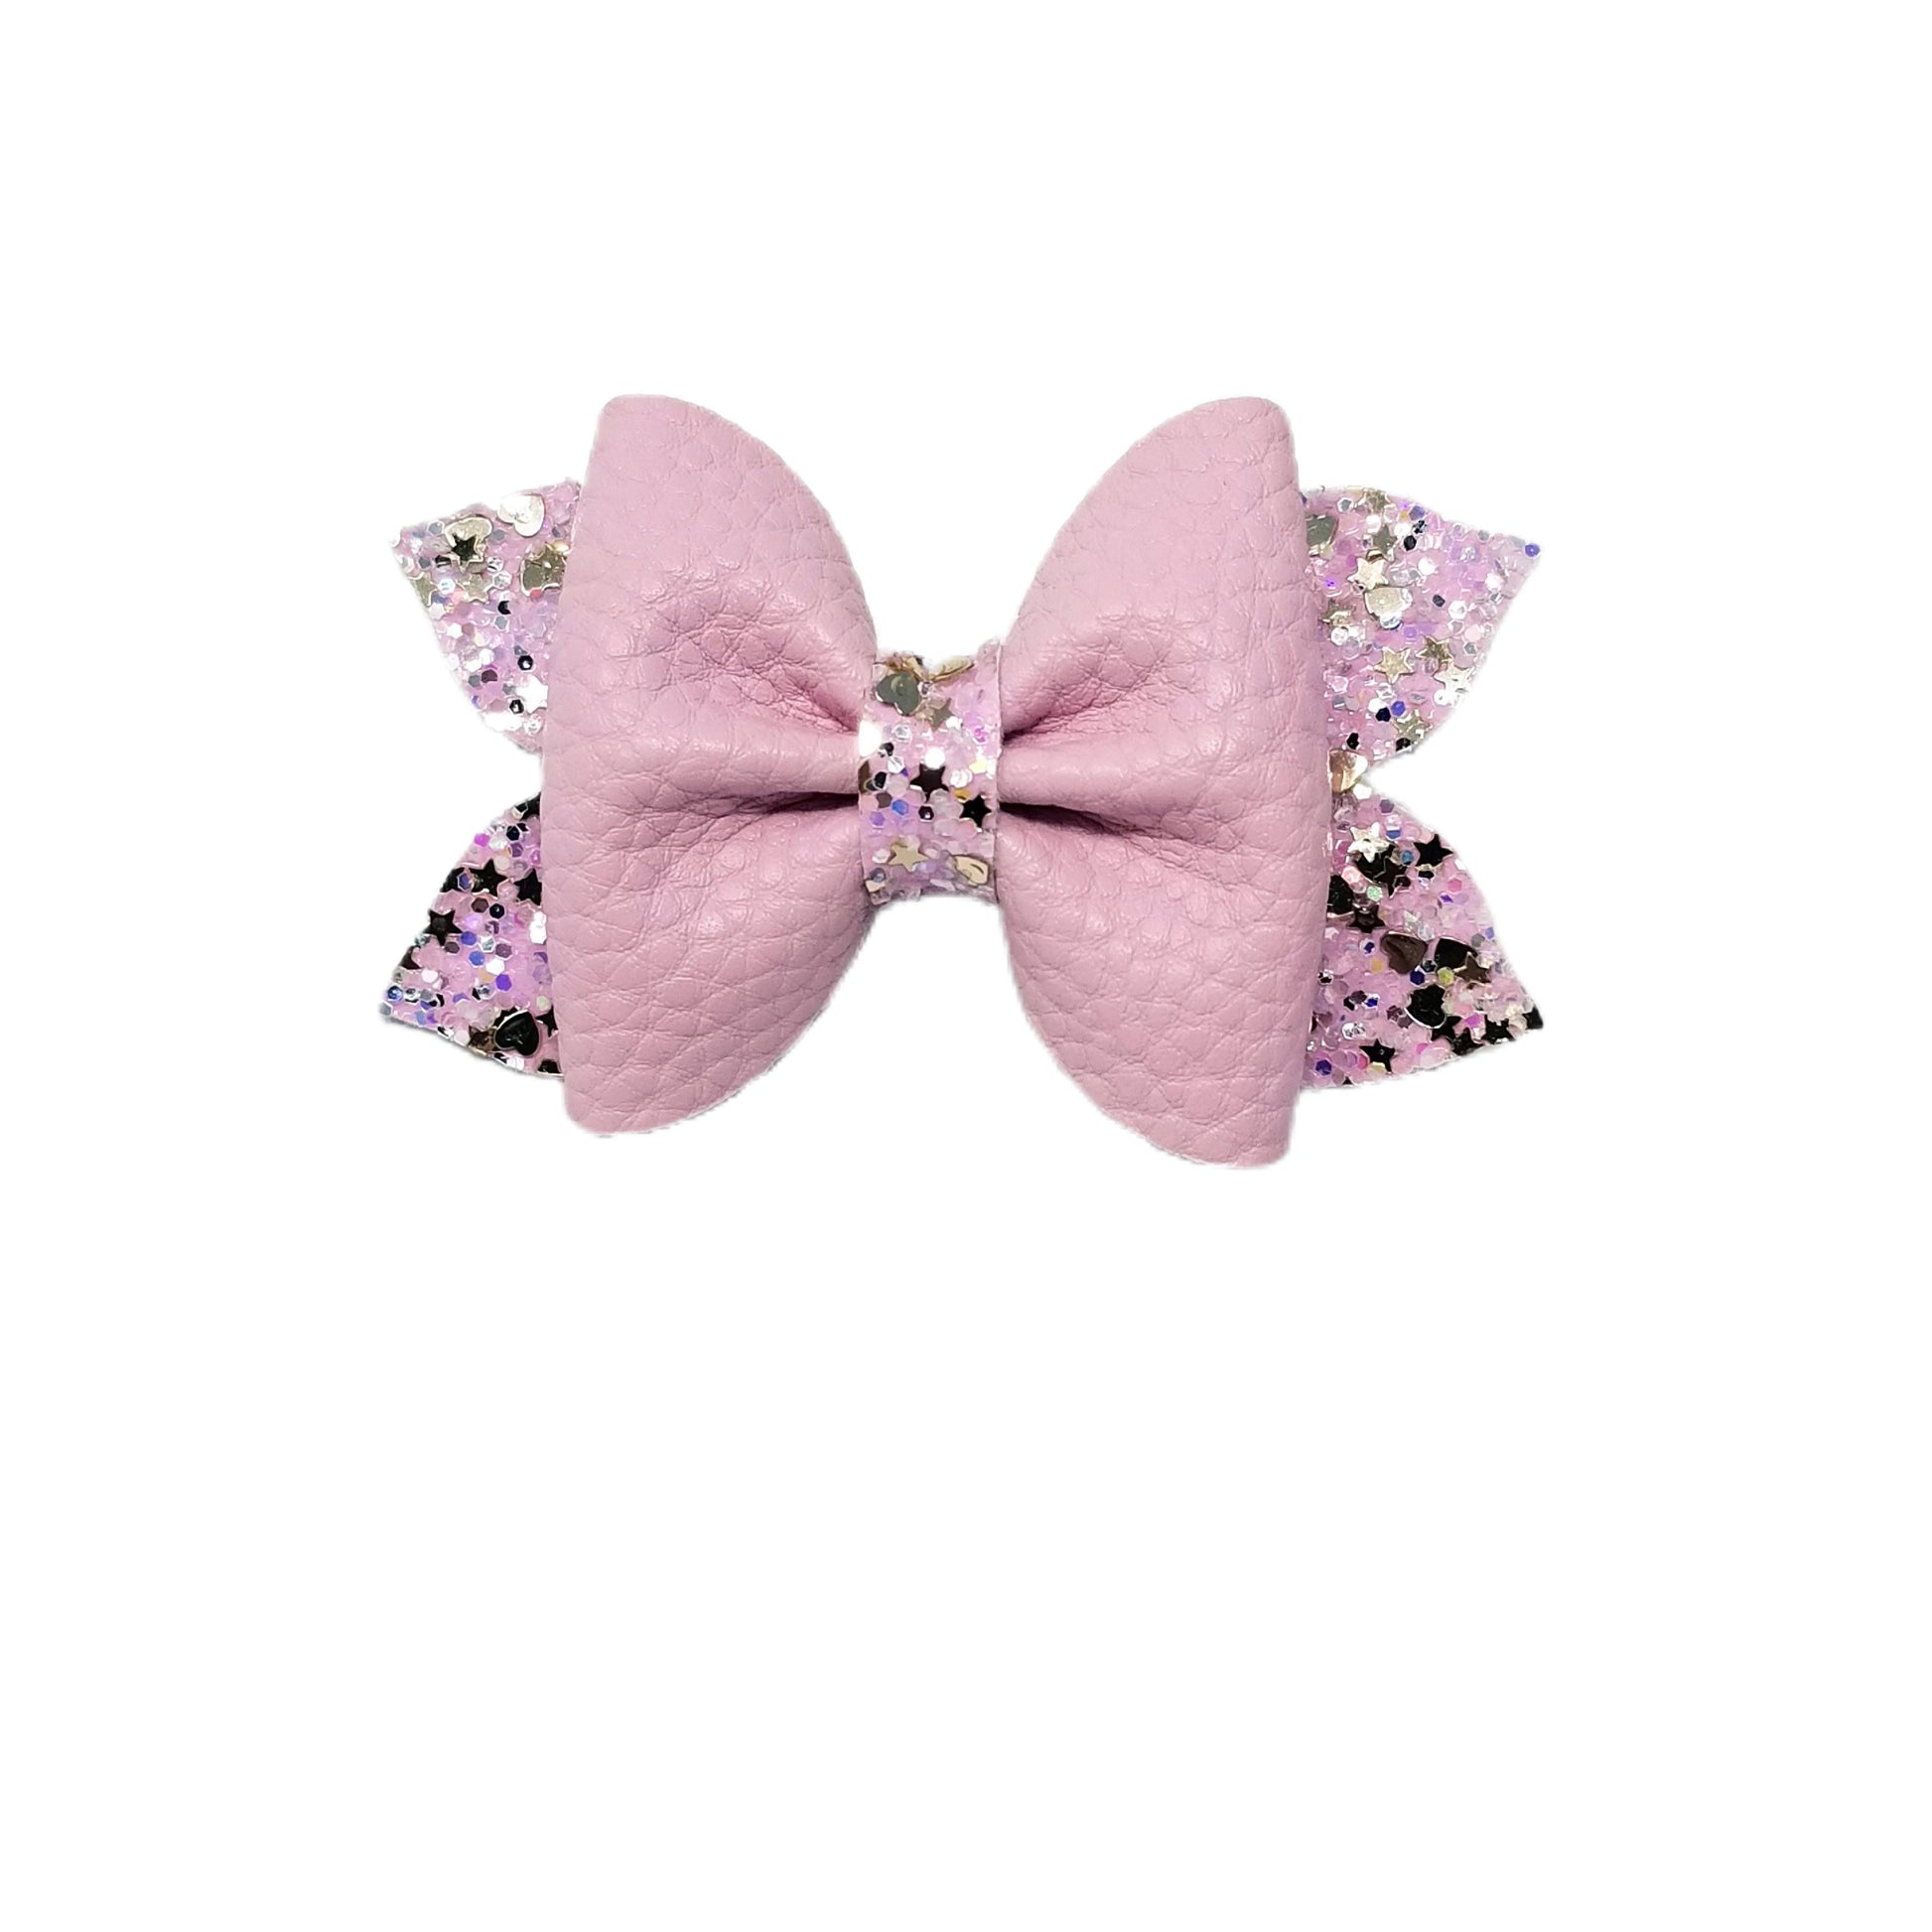 3 inch Pale Pink Pixie Pinch Bow